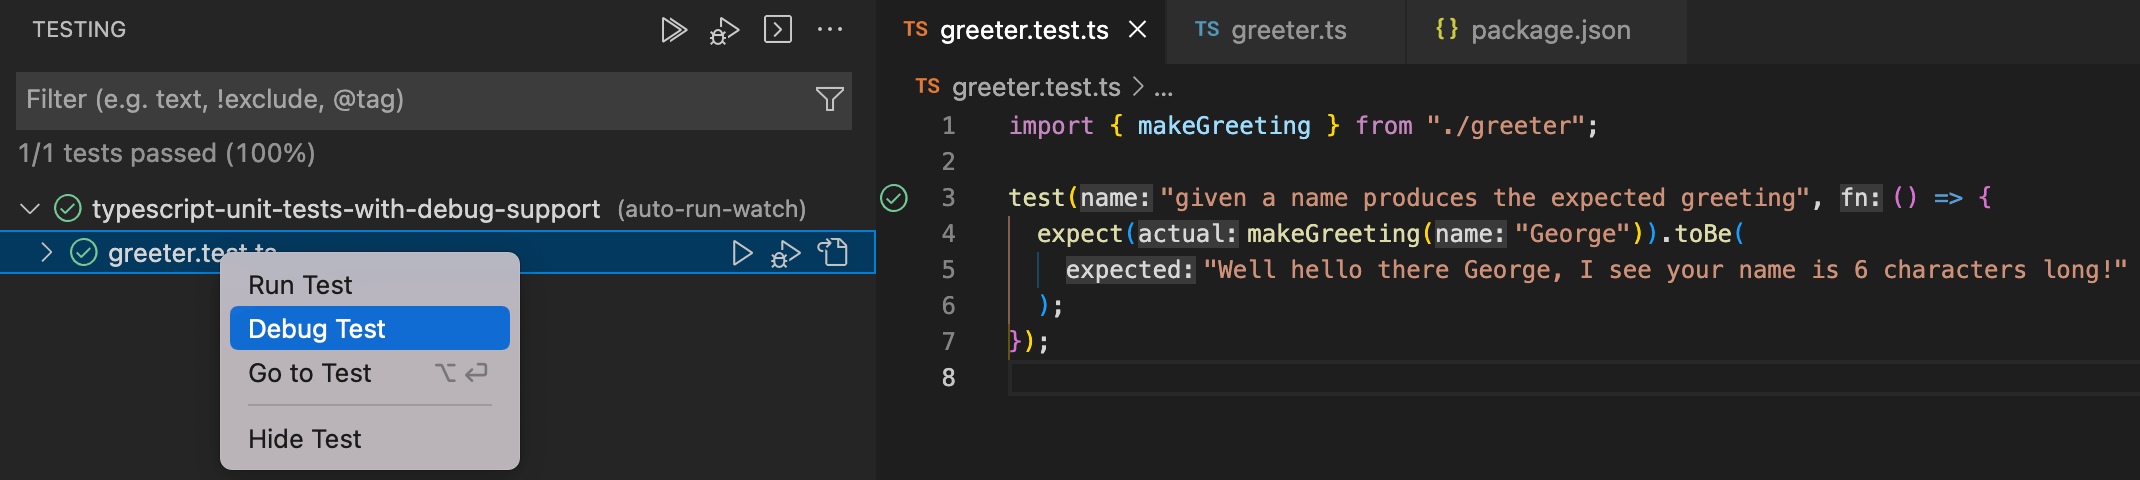 screenshot of the context menu in the Jest explorer featuring the words &quot;Debug Test&quot;